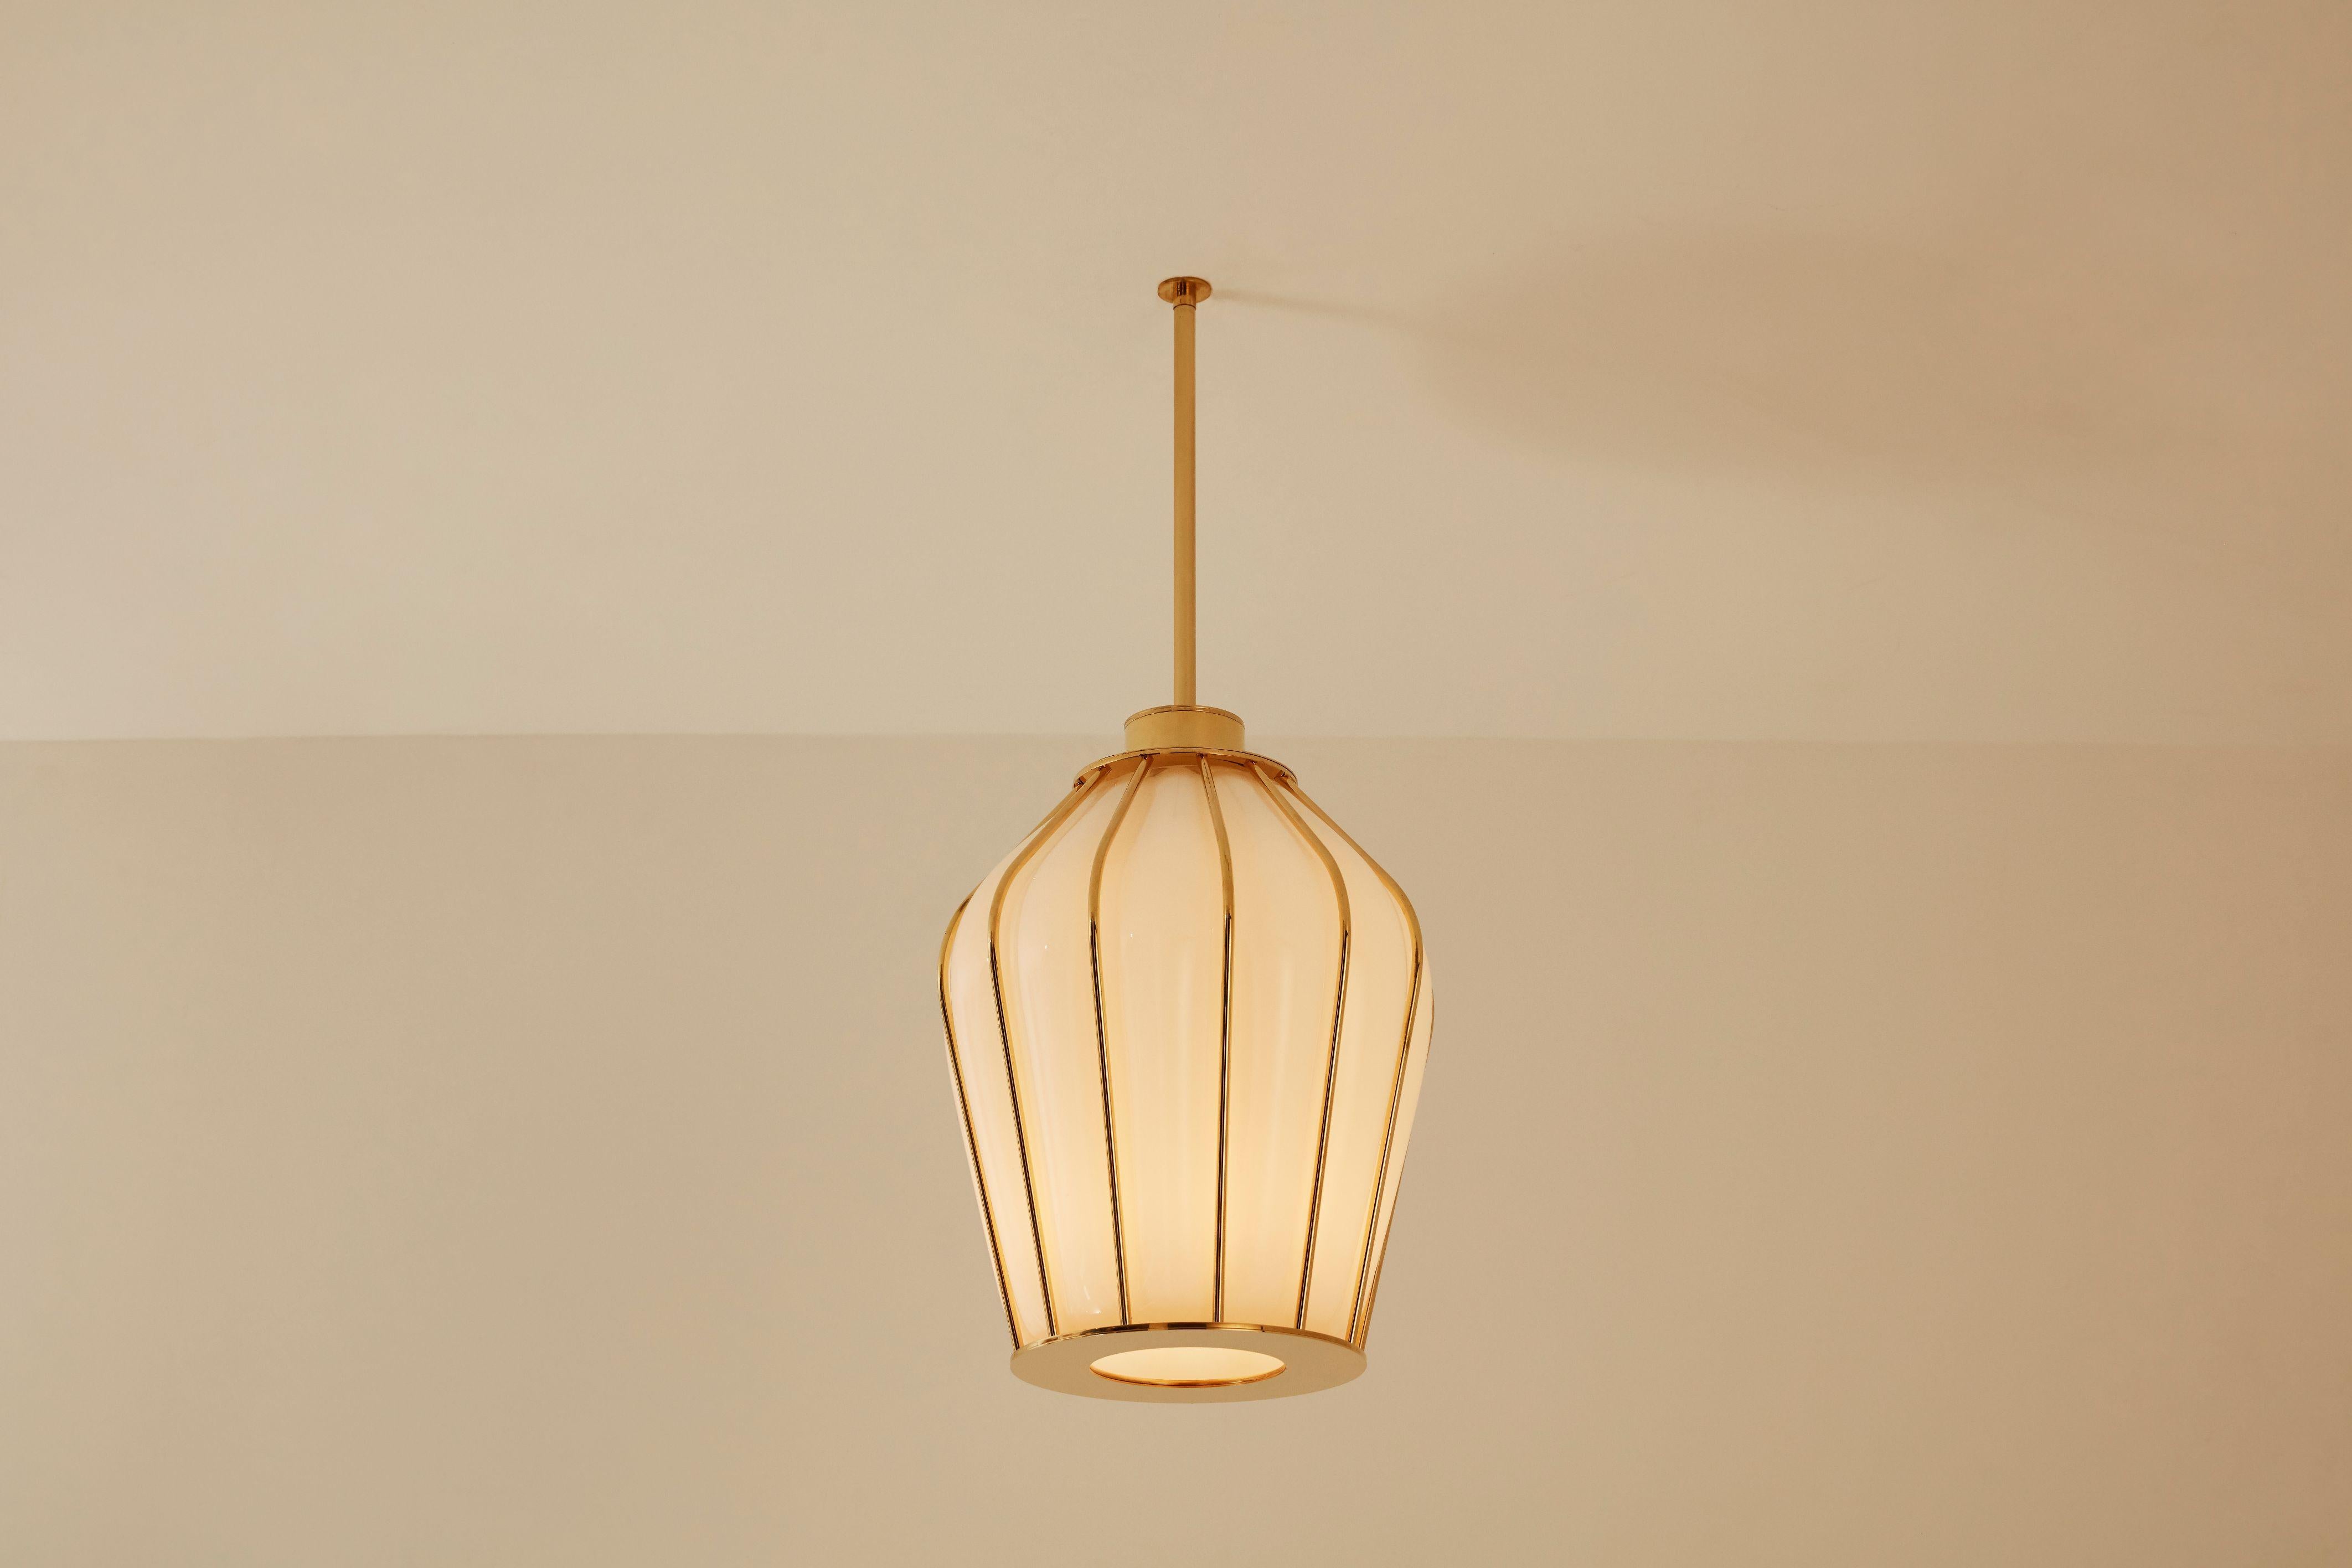 Sky lantern pendant Light by Mydriaz
Dimensions: Diameter 28 x height 38 cm
Materials: Brass, glass
Finishes: Golden-plated, polished brass, white nickel finish on polished brass, black nickel finish on polished brass.

All our lamps can be wired